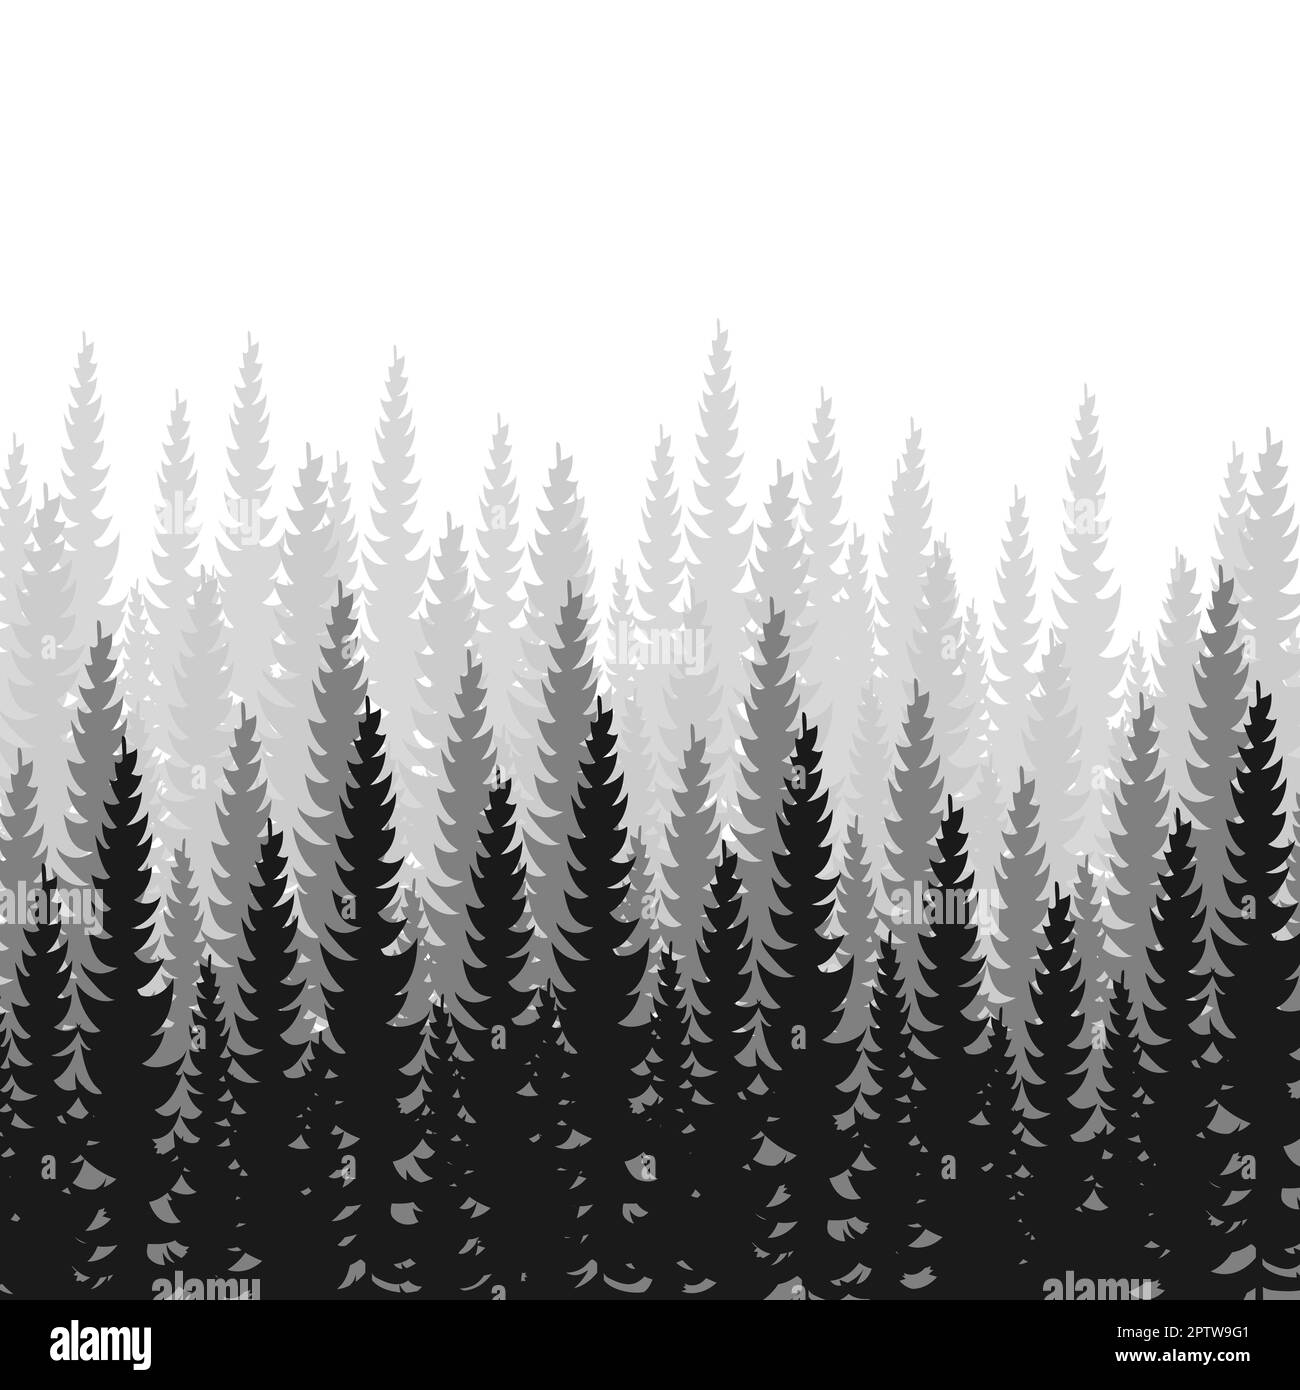 A vector silhouette illustration of a treeline of a densse forest